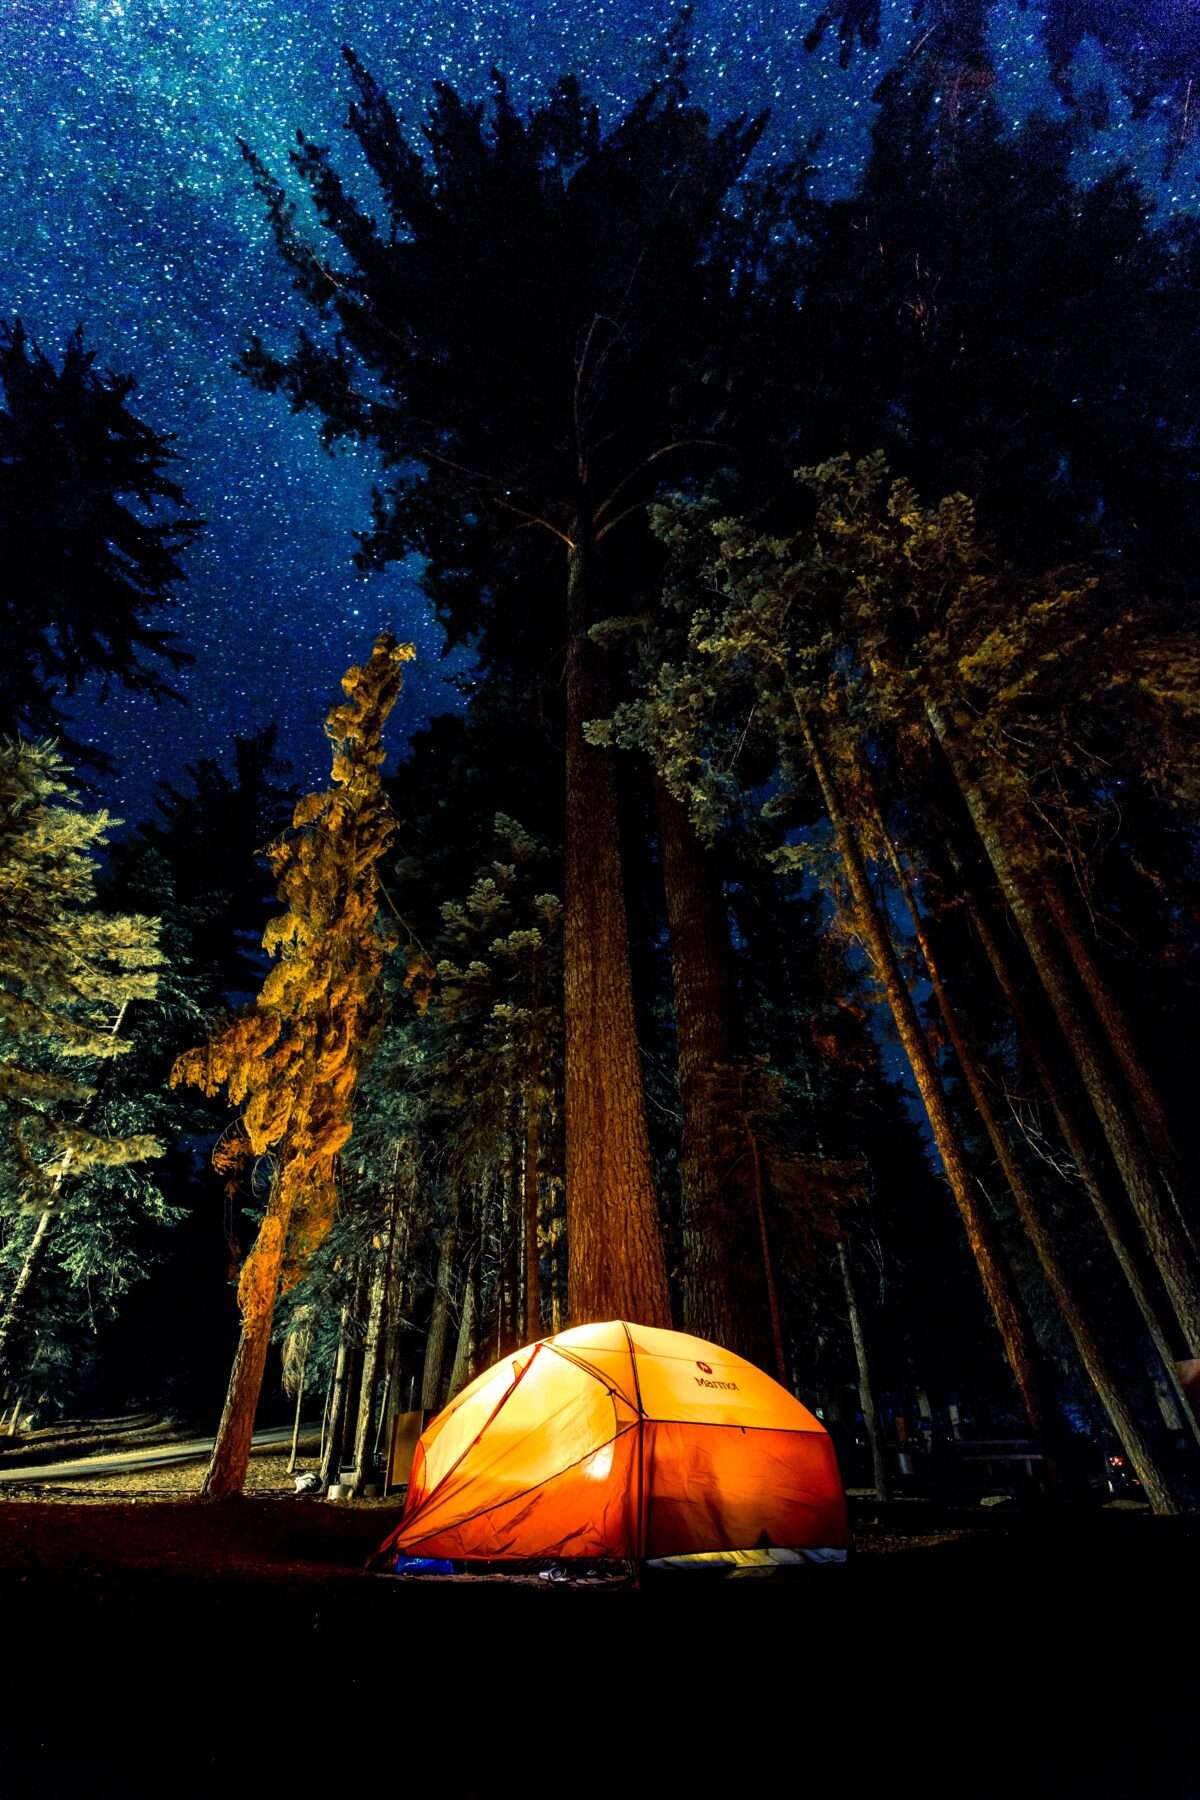 Tent in a cozy surrounding